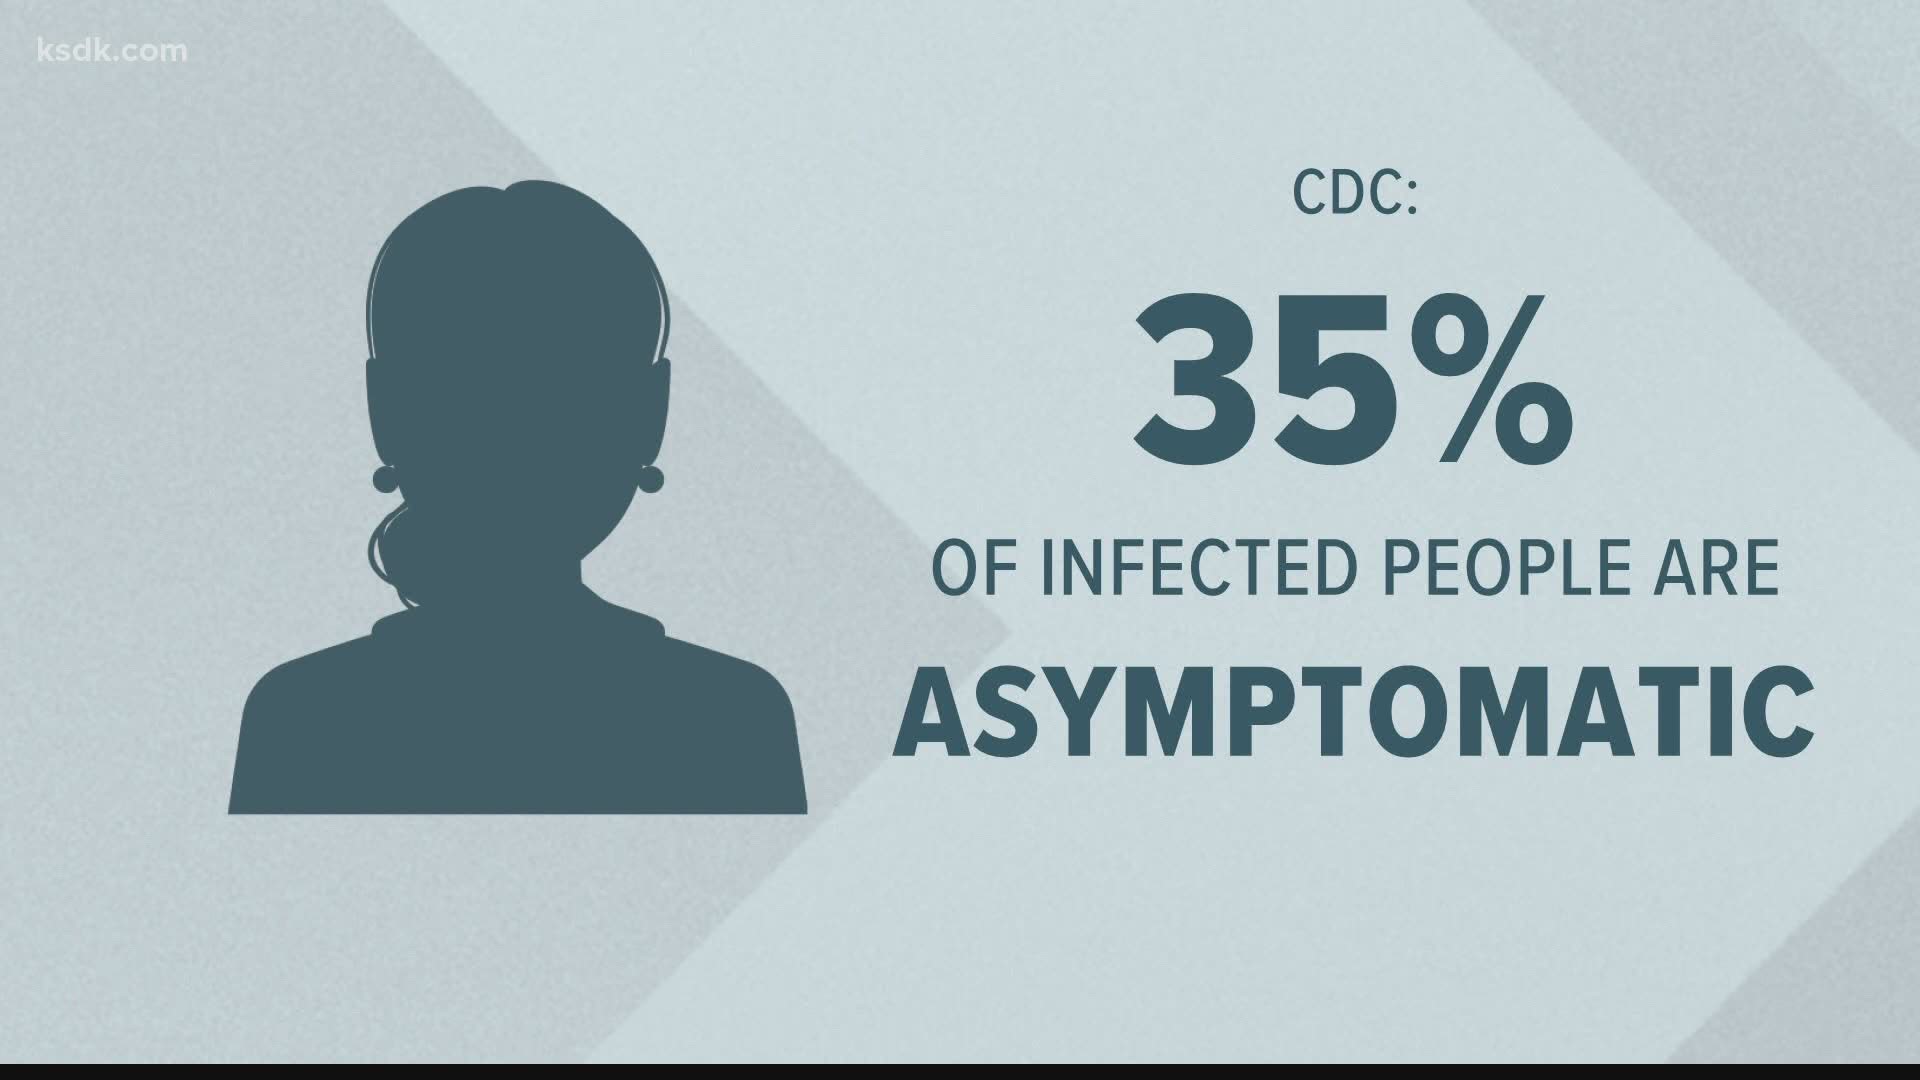 Some experts say asymptomatic people could be the biggest hurdle to getting the coronavirus under control.